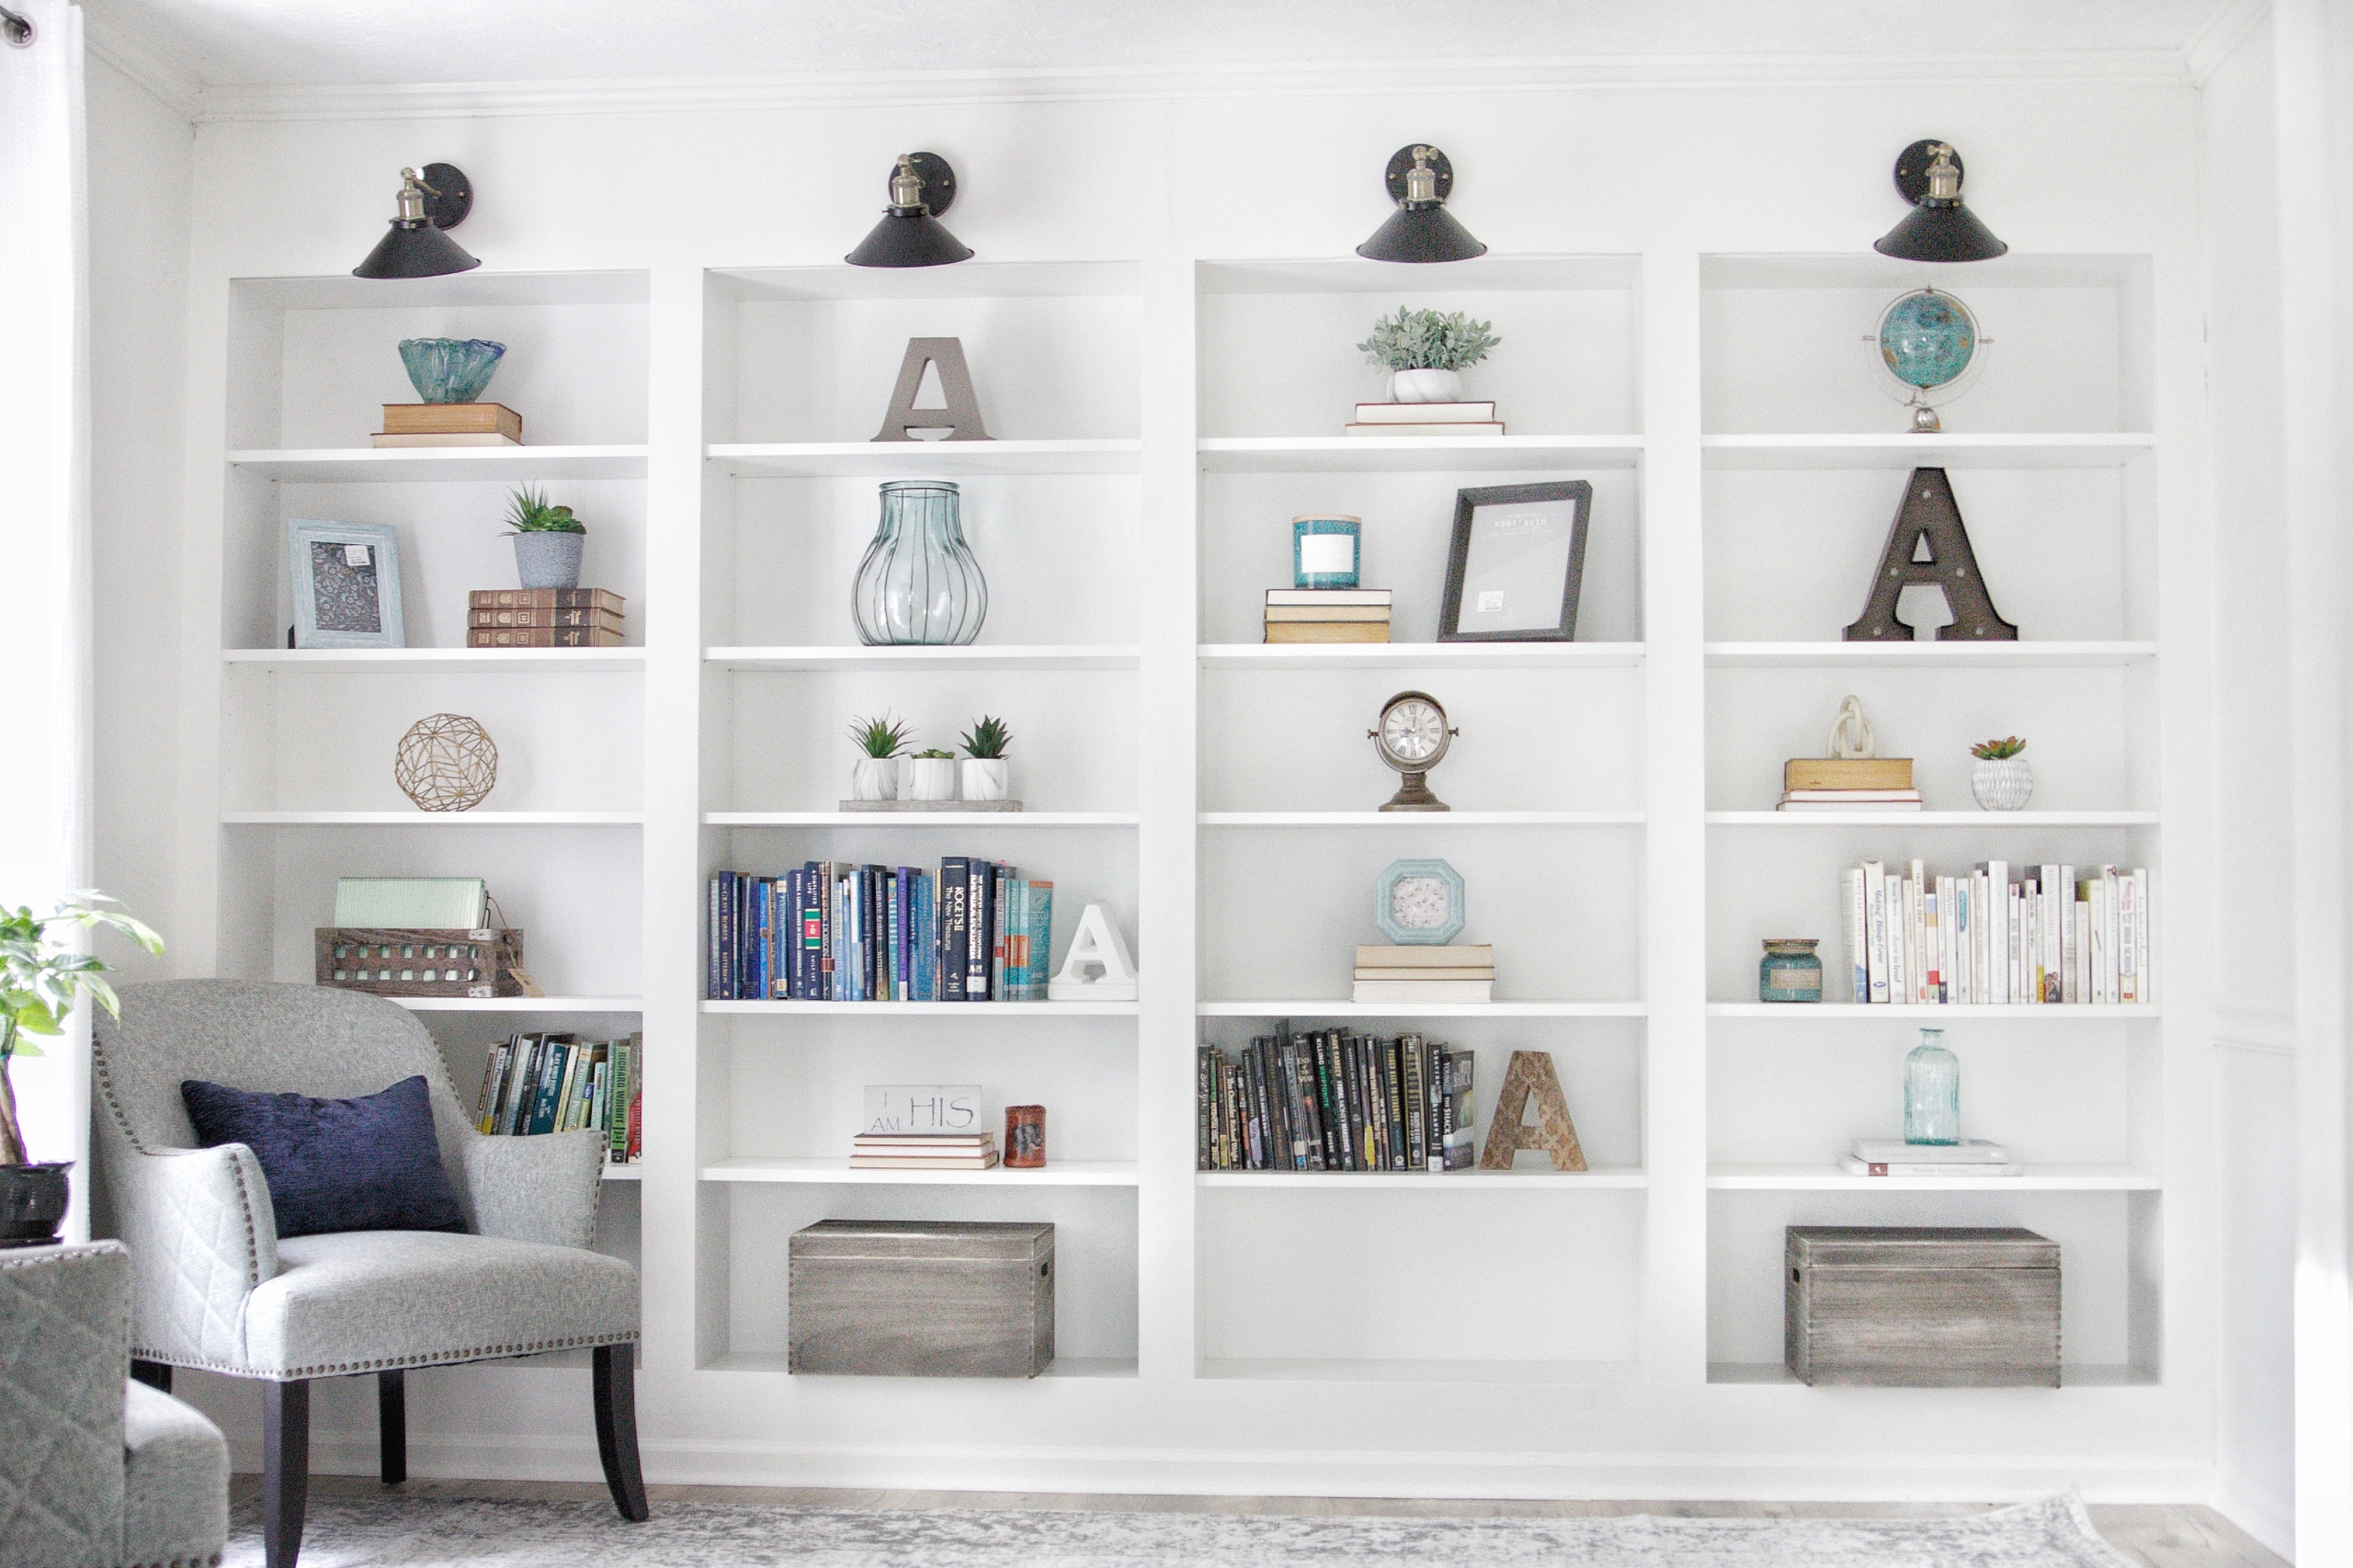 Diy Built Ins Using Ikea Billy, How To Build Ikea Billy Bookcase